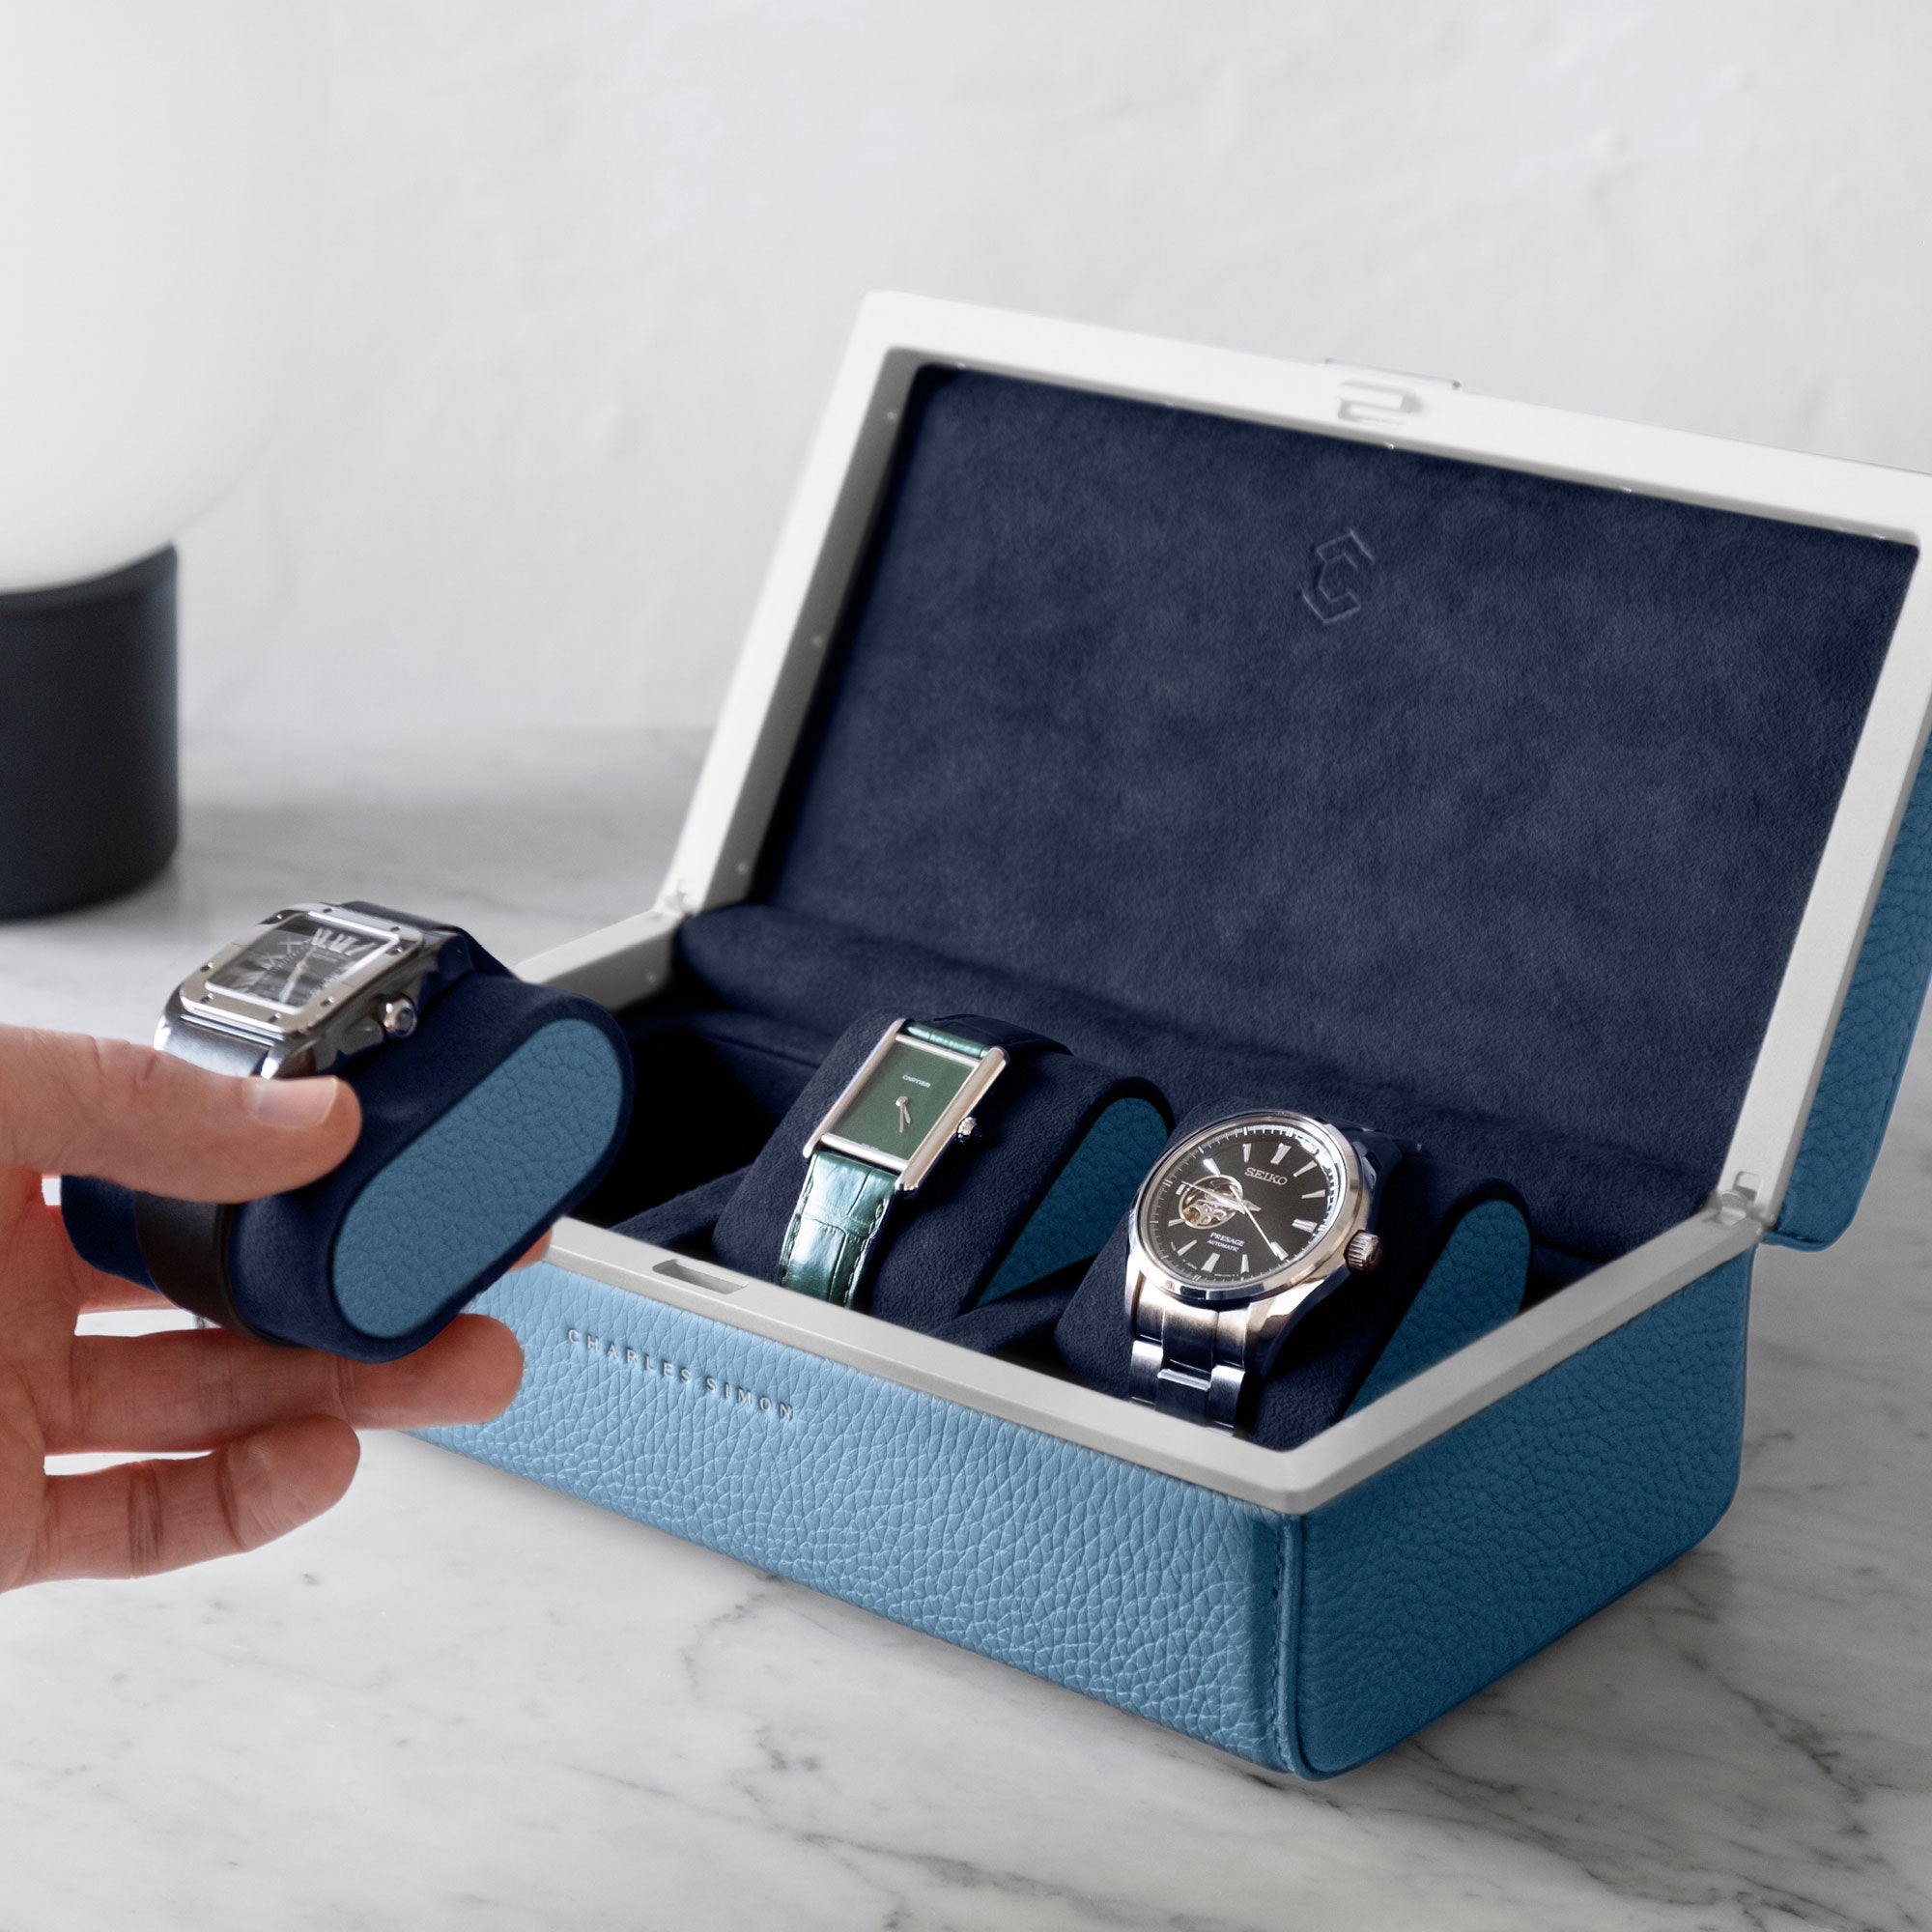 Lifestyle photo of man taking Cartier watch from the Eaton 3 watch case in sky blue leather, deep blue Alcantara interior and sky blue leather accents. The handmade watch case is holding a watch collection of 3 luxury watches while standing on a marble table